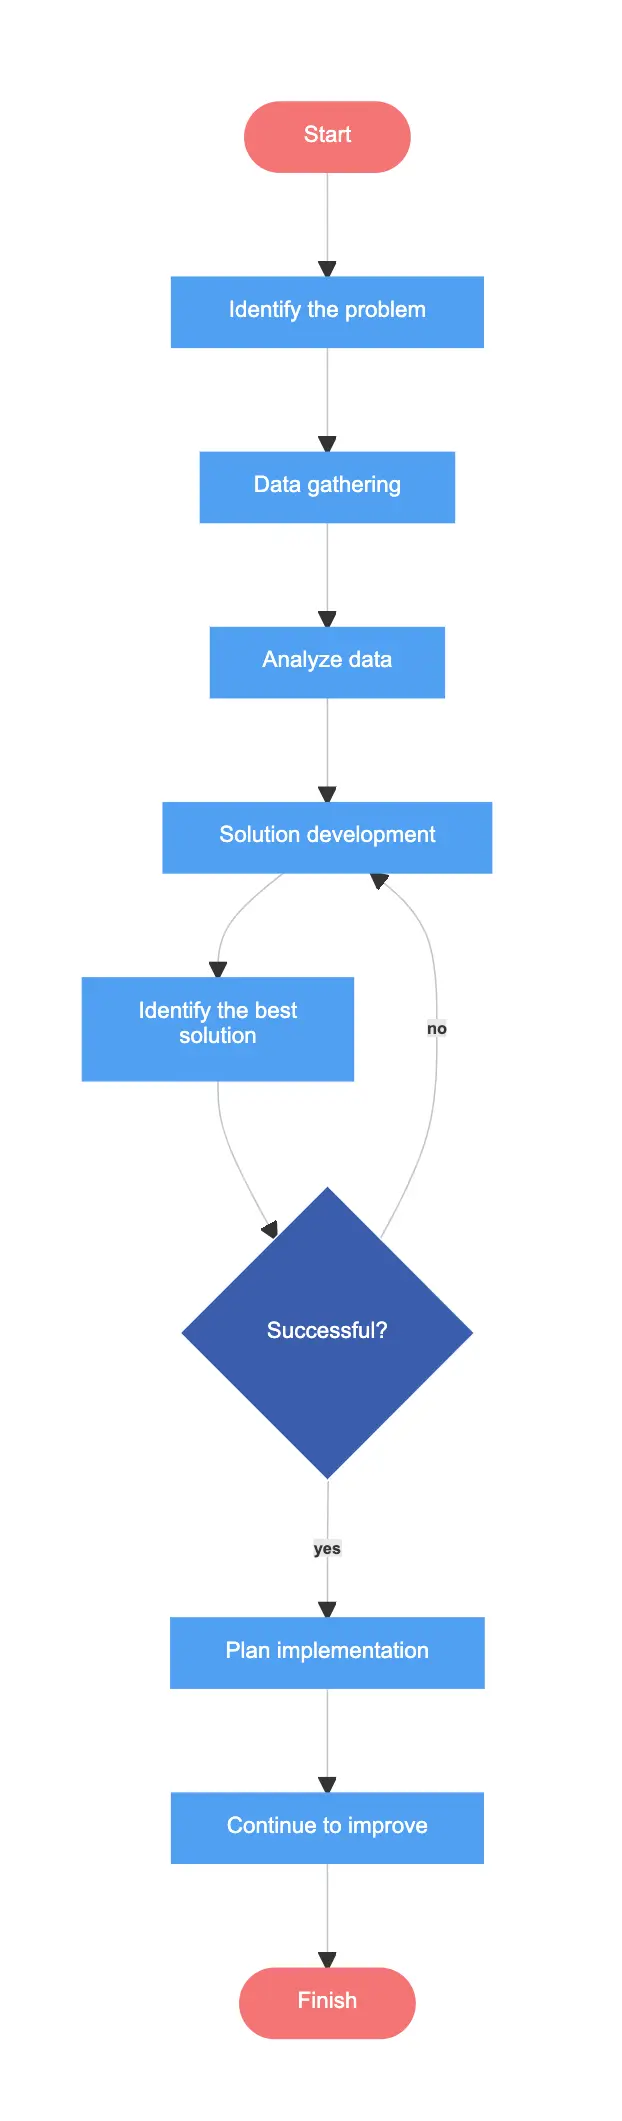 An example to illustrate problem-solving steps in ASP. Left: The